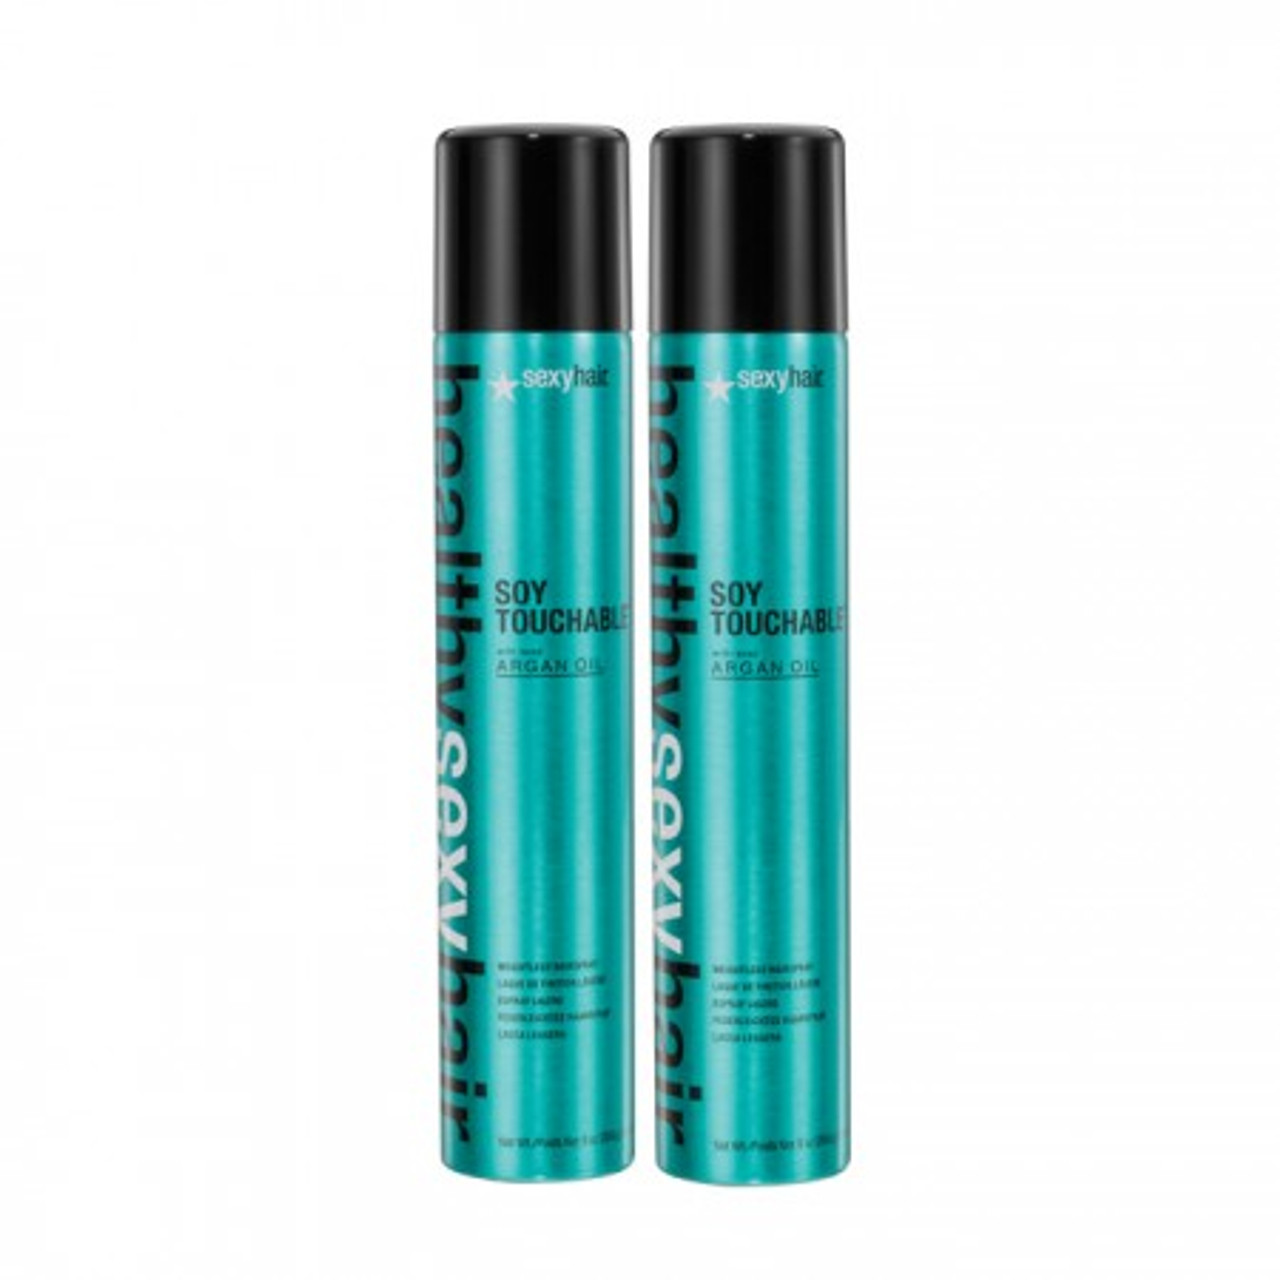 Sexy Hair Healthy So Touchable Weightless Hairspray, 9 Ounce